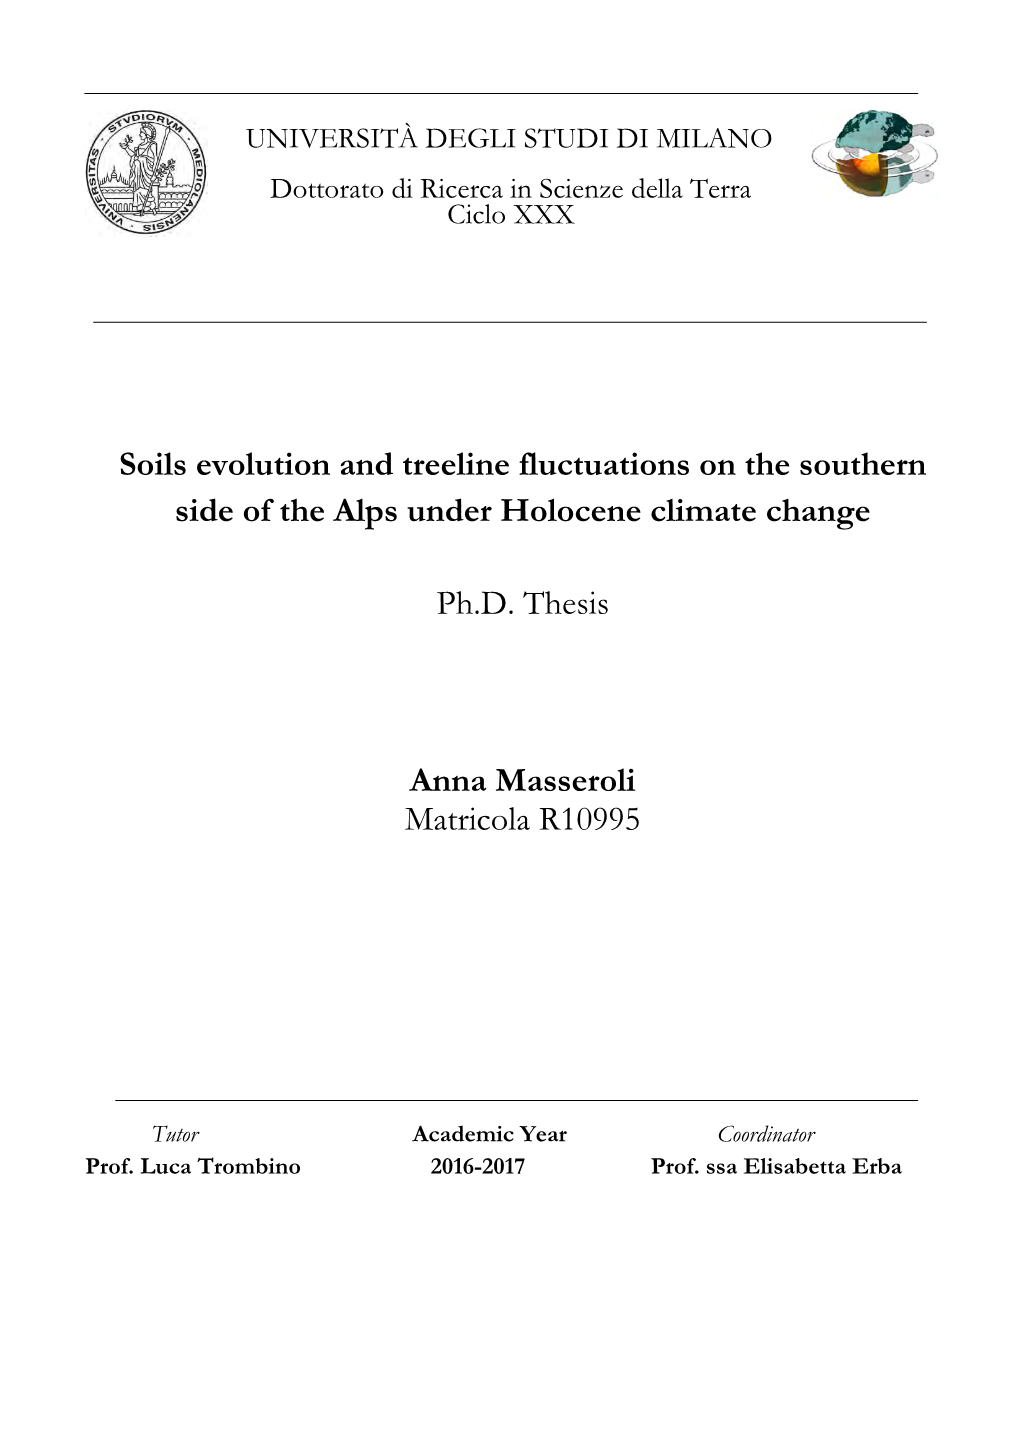 Soils Evolution and Treeline Fluctuations on the Southern Side of the Alps Under Holocene Climate Change